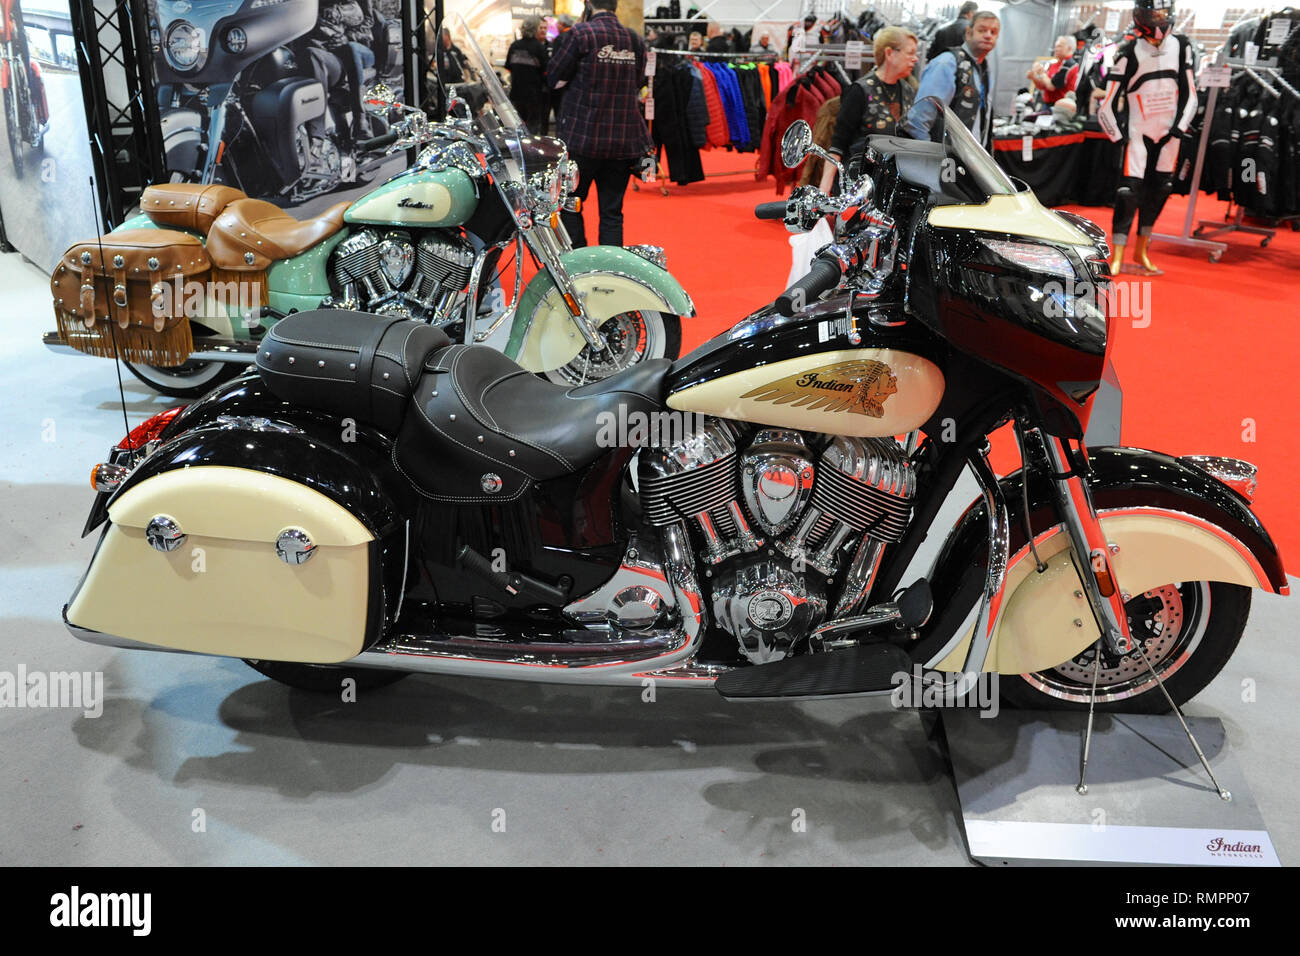 London, UK. 15th Feb, 2019. An Indian Chieftain Classic 1811cc motorbike on display at the Carole Nash MCN London Motorcycle Show which is taking place at ExCel London, United Kingdom.  The show features a vast variety of wheeled transport from motorbikes, scooters and superbikes to customised one-off choppers from the world’s top motorcycle manufacturers, Around 40,000 fans are expected to visit the show, ranging from two wheel enthusiasts to baby boomer, born again bikers looking for their ultimate motorcycle for a dream roadtrip. Credit: Michael Preston/Alamy Live News Stock Photo